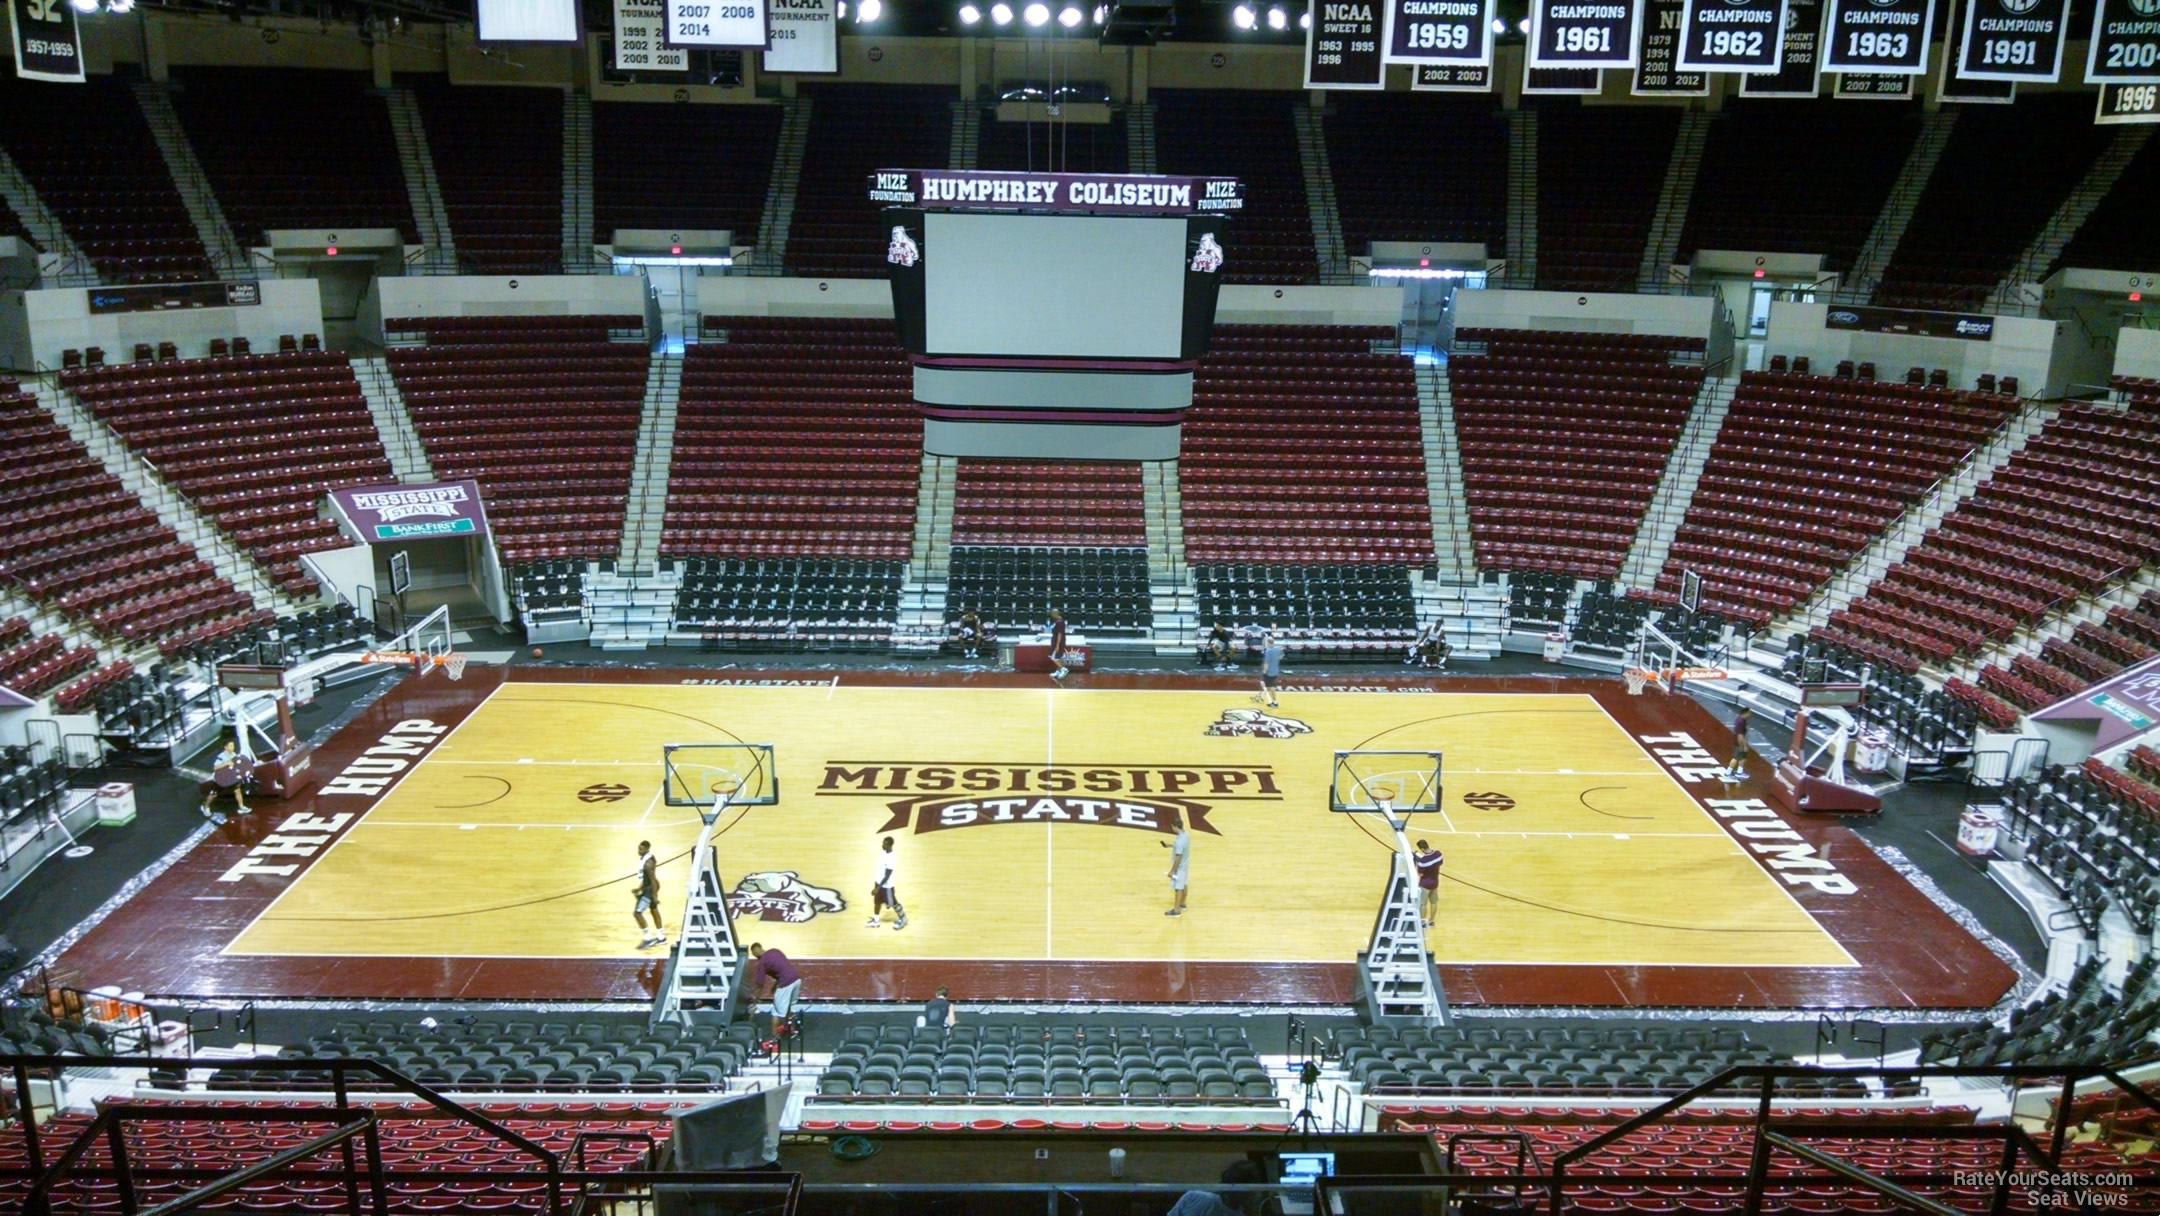 section 210, row 8 seat view  - humphrey coliseum